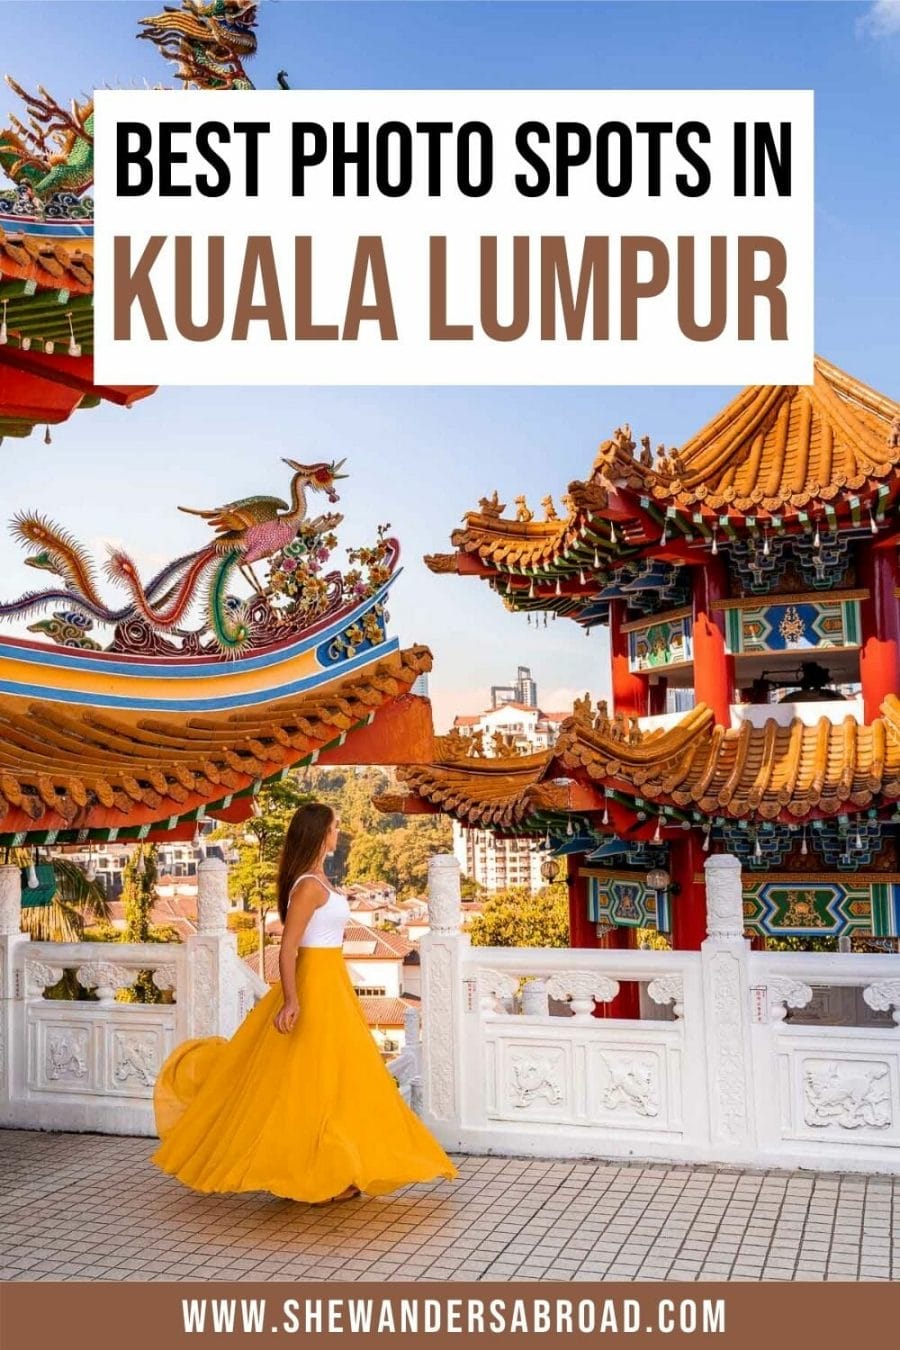 12 Most Instagrammable Places in KL for Epic Photos